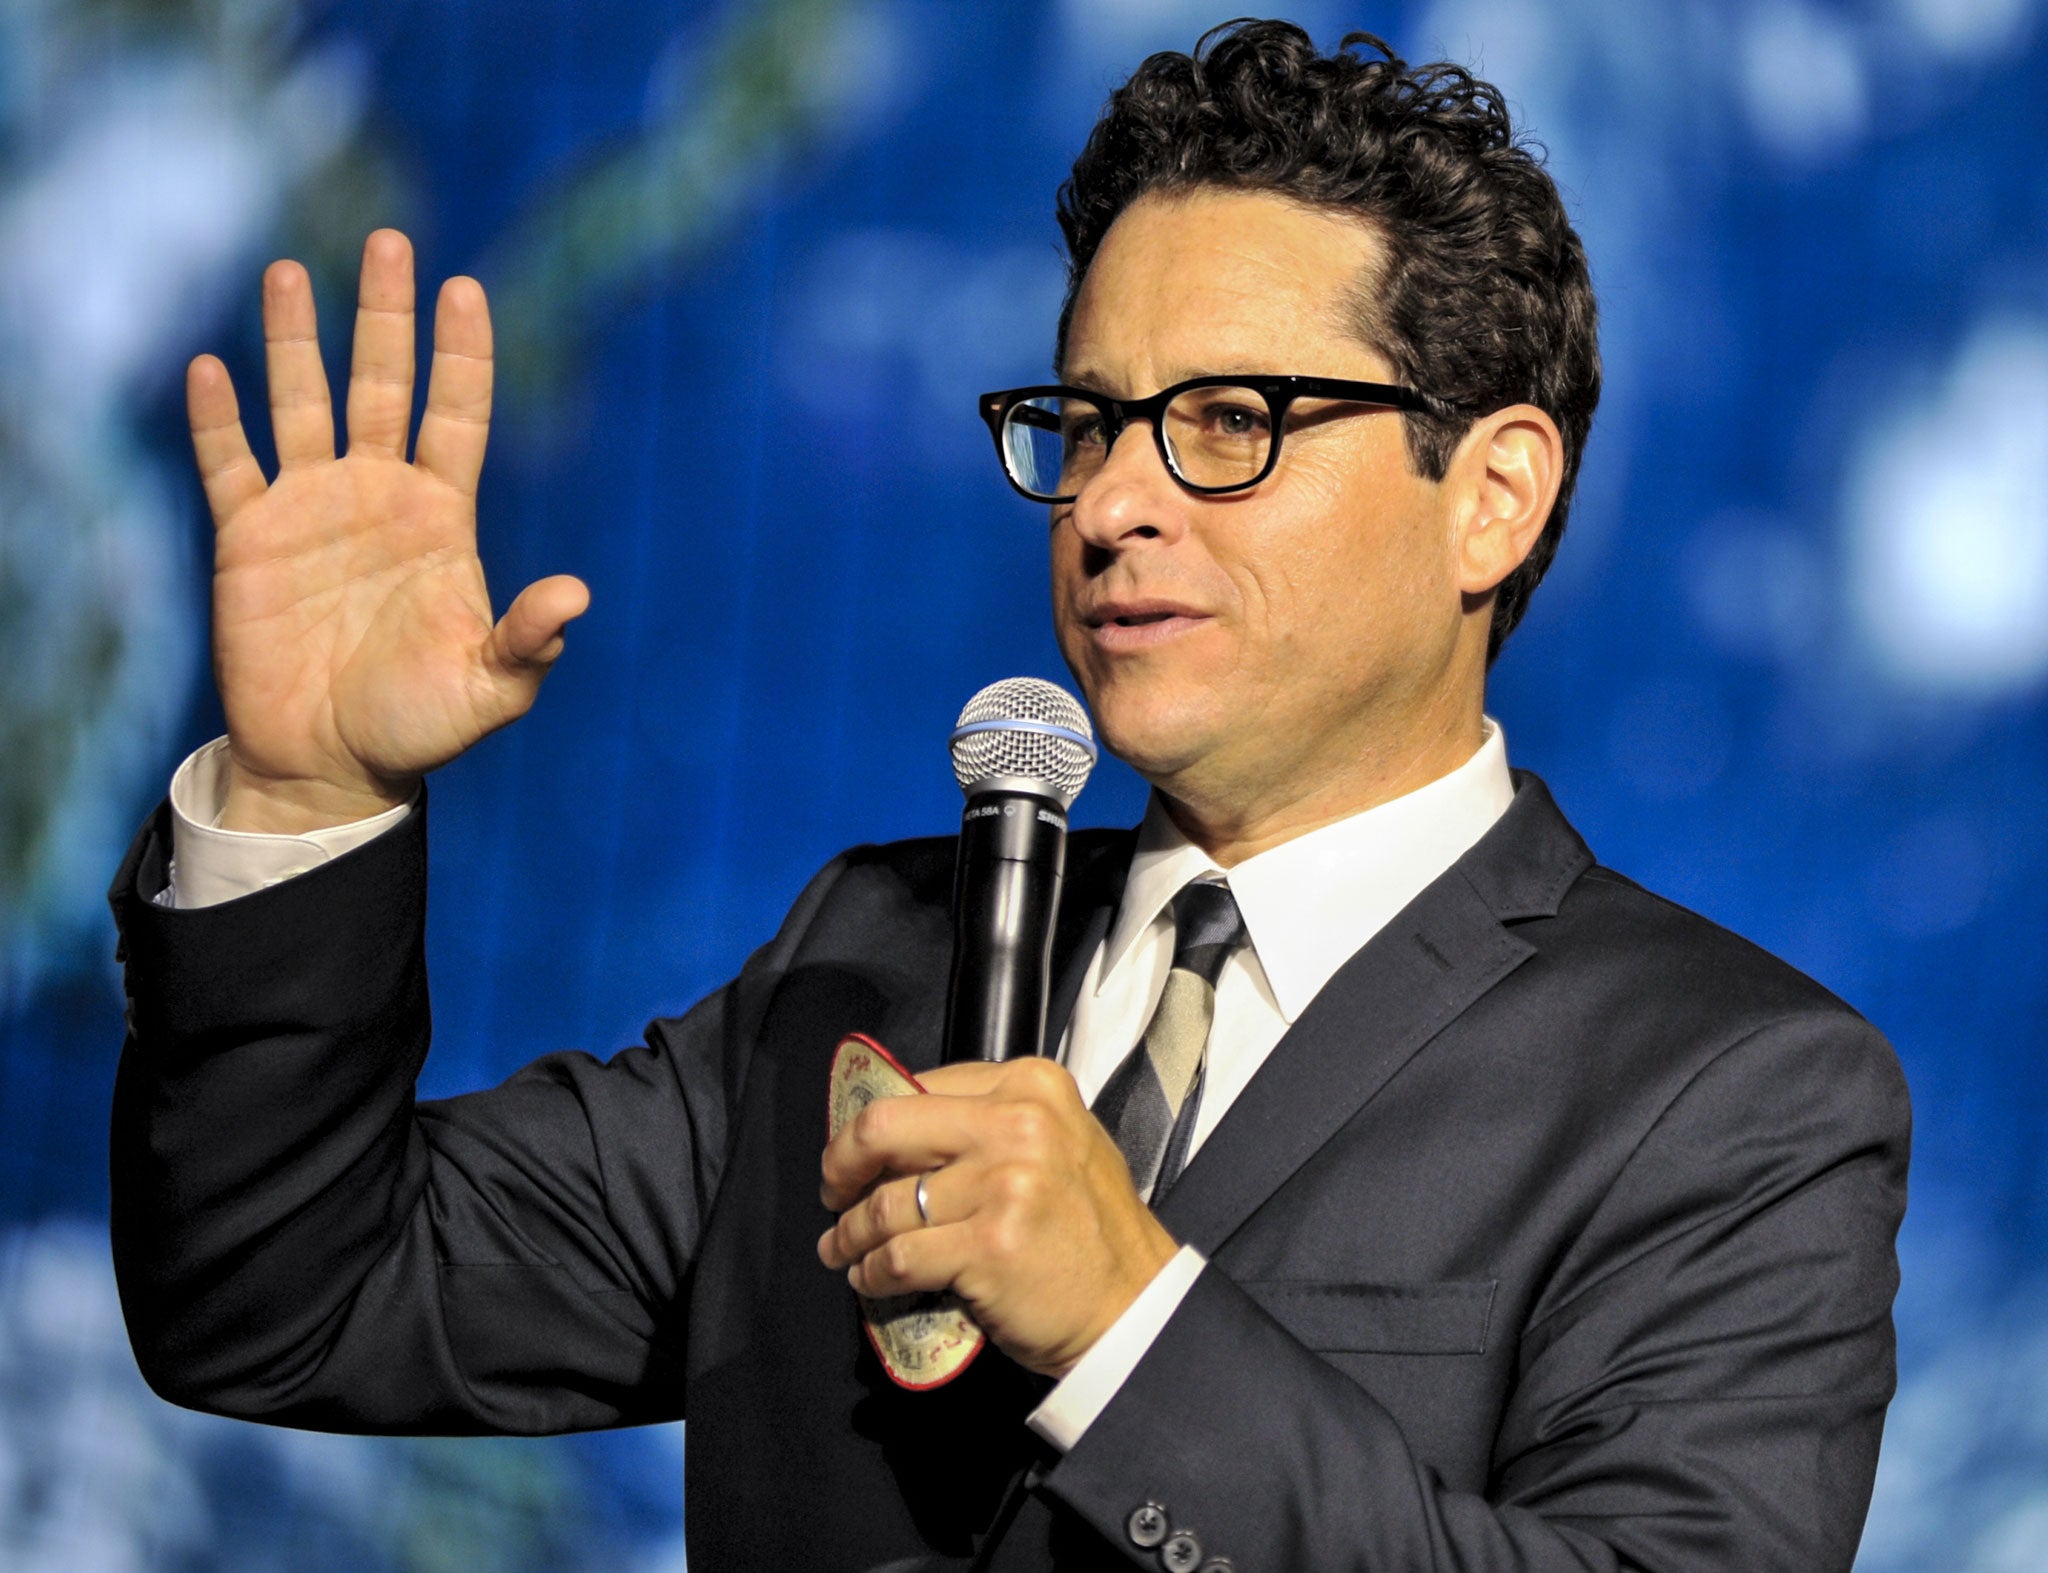 JJ Abrams is set to co-write the new Star Wars film